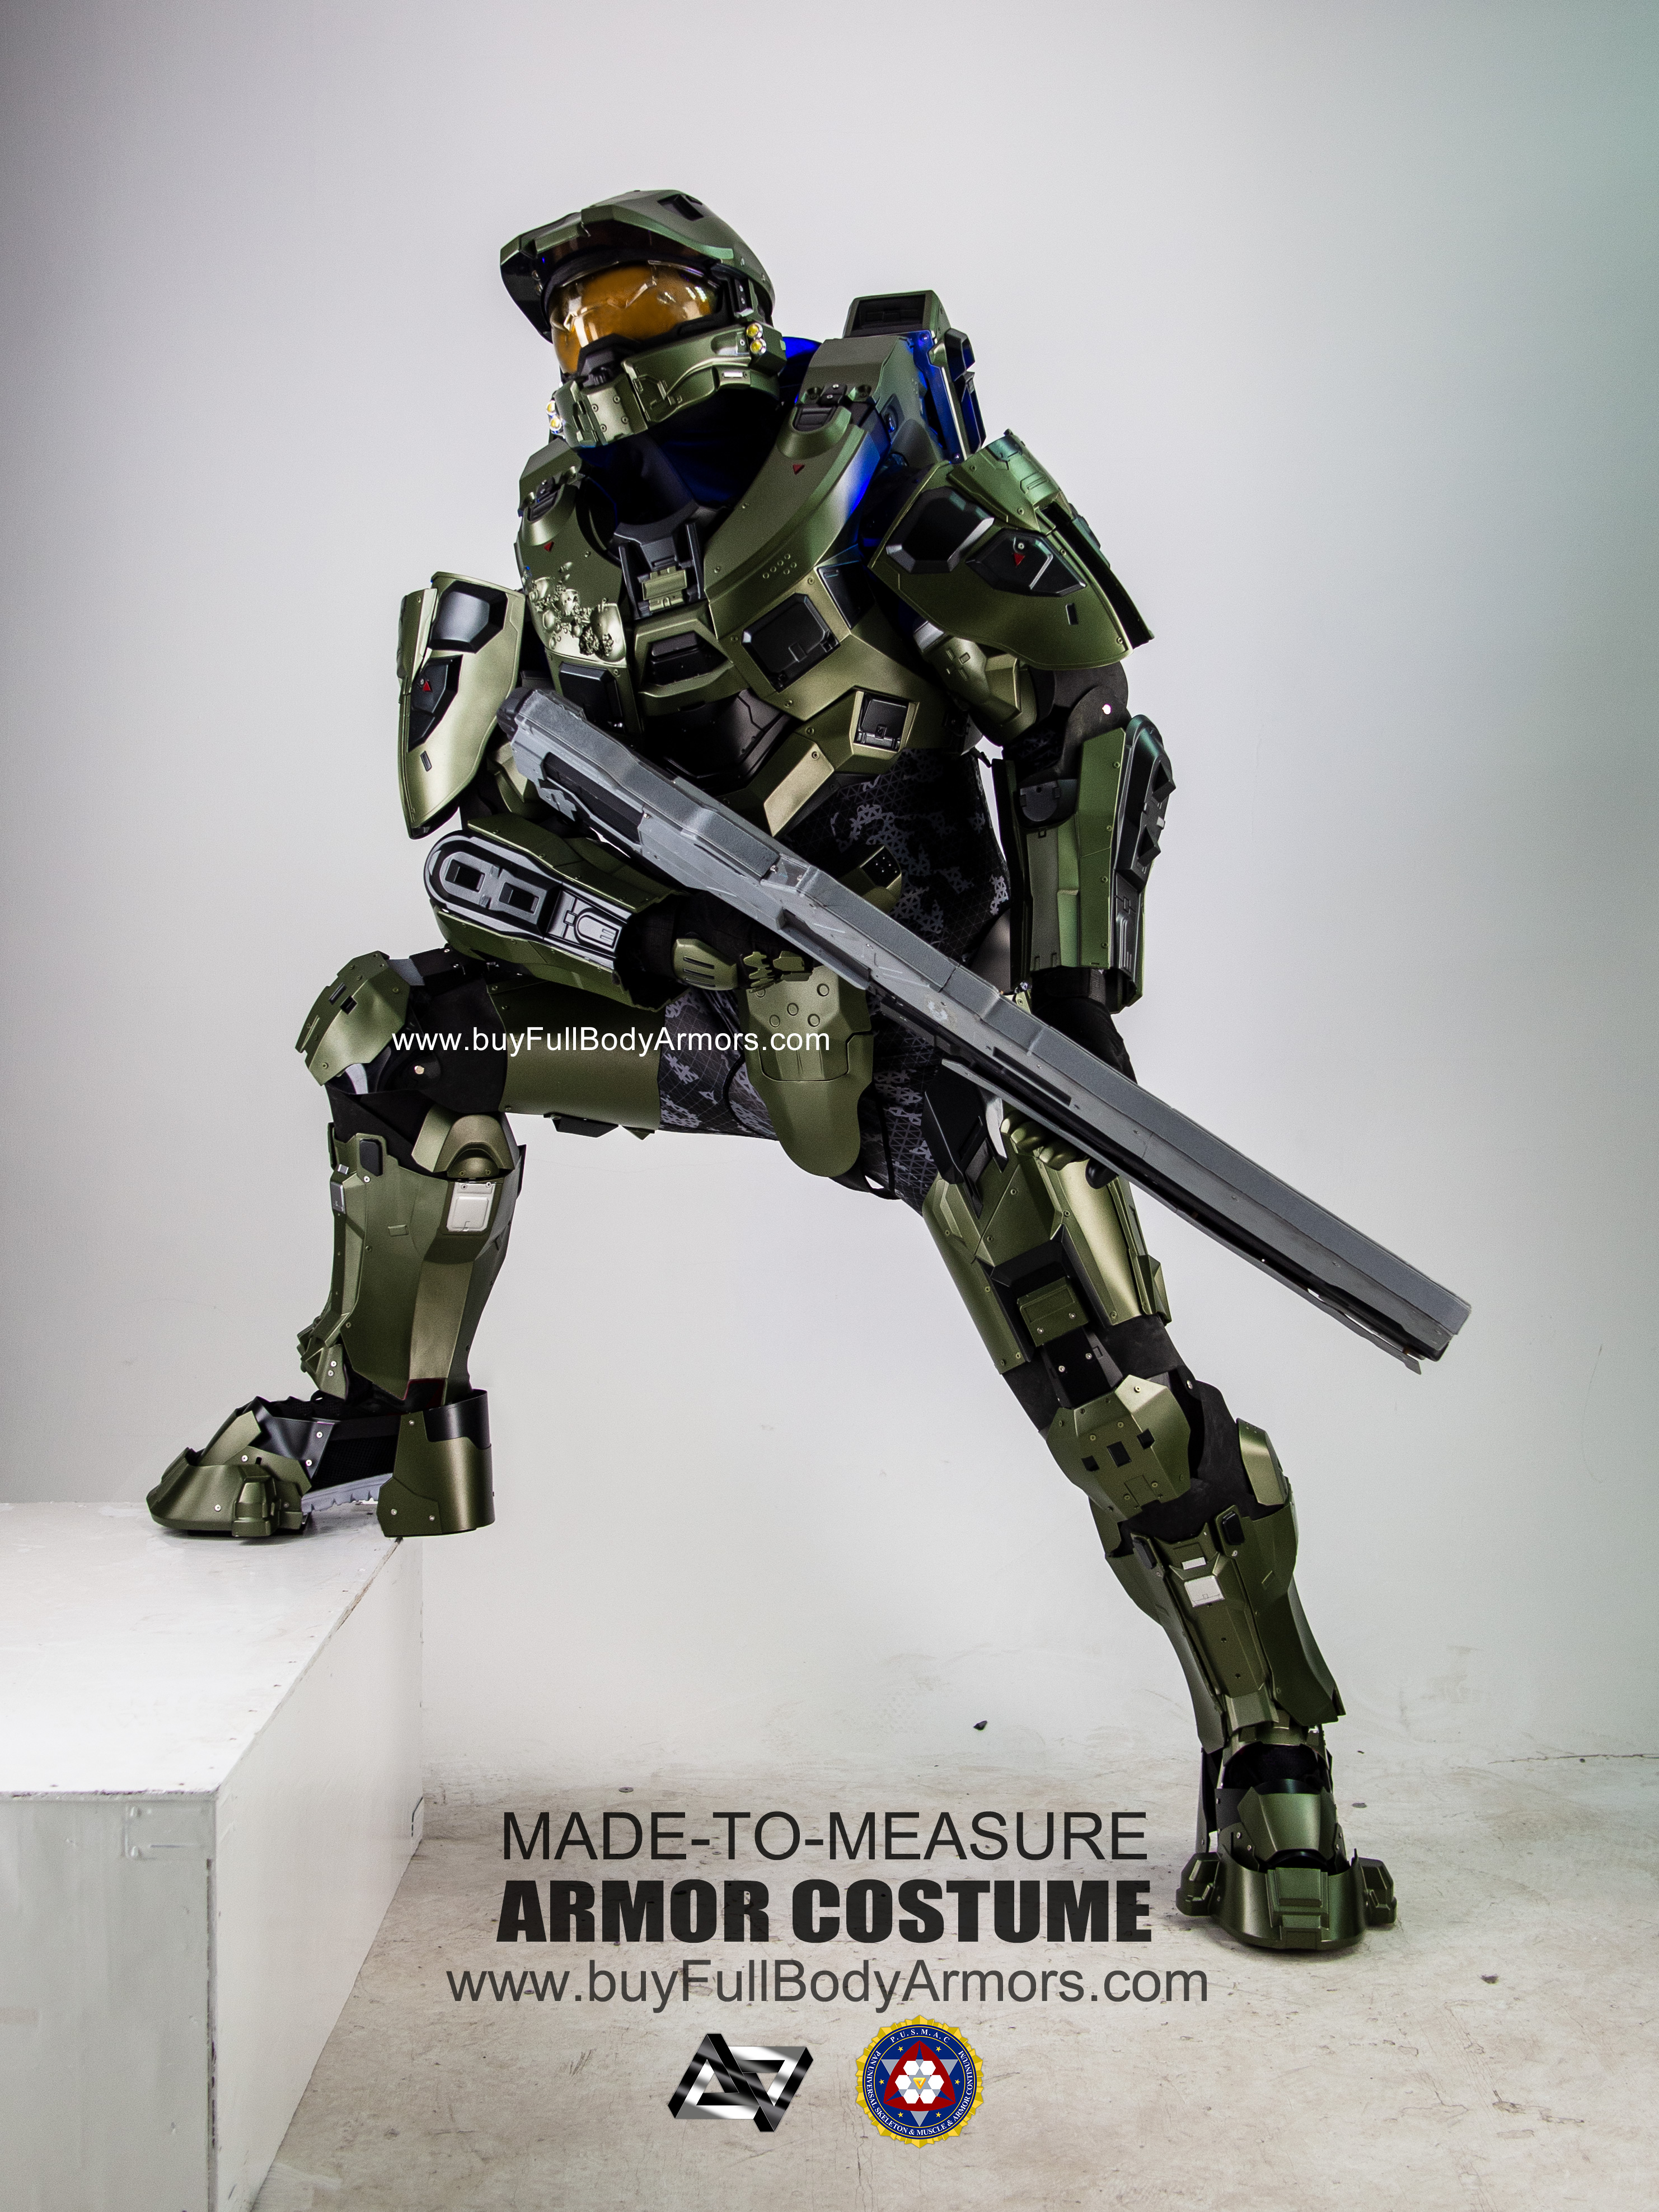 Halo 5 Master Chief Armor Suit Costume side